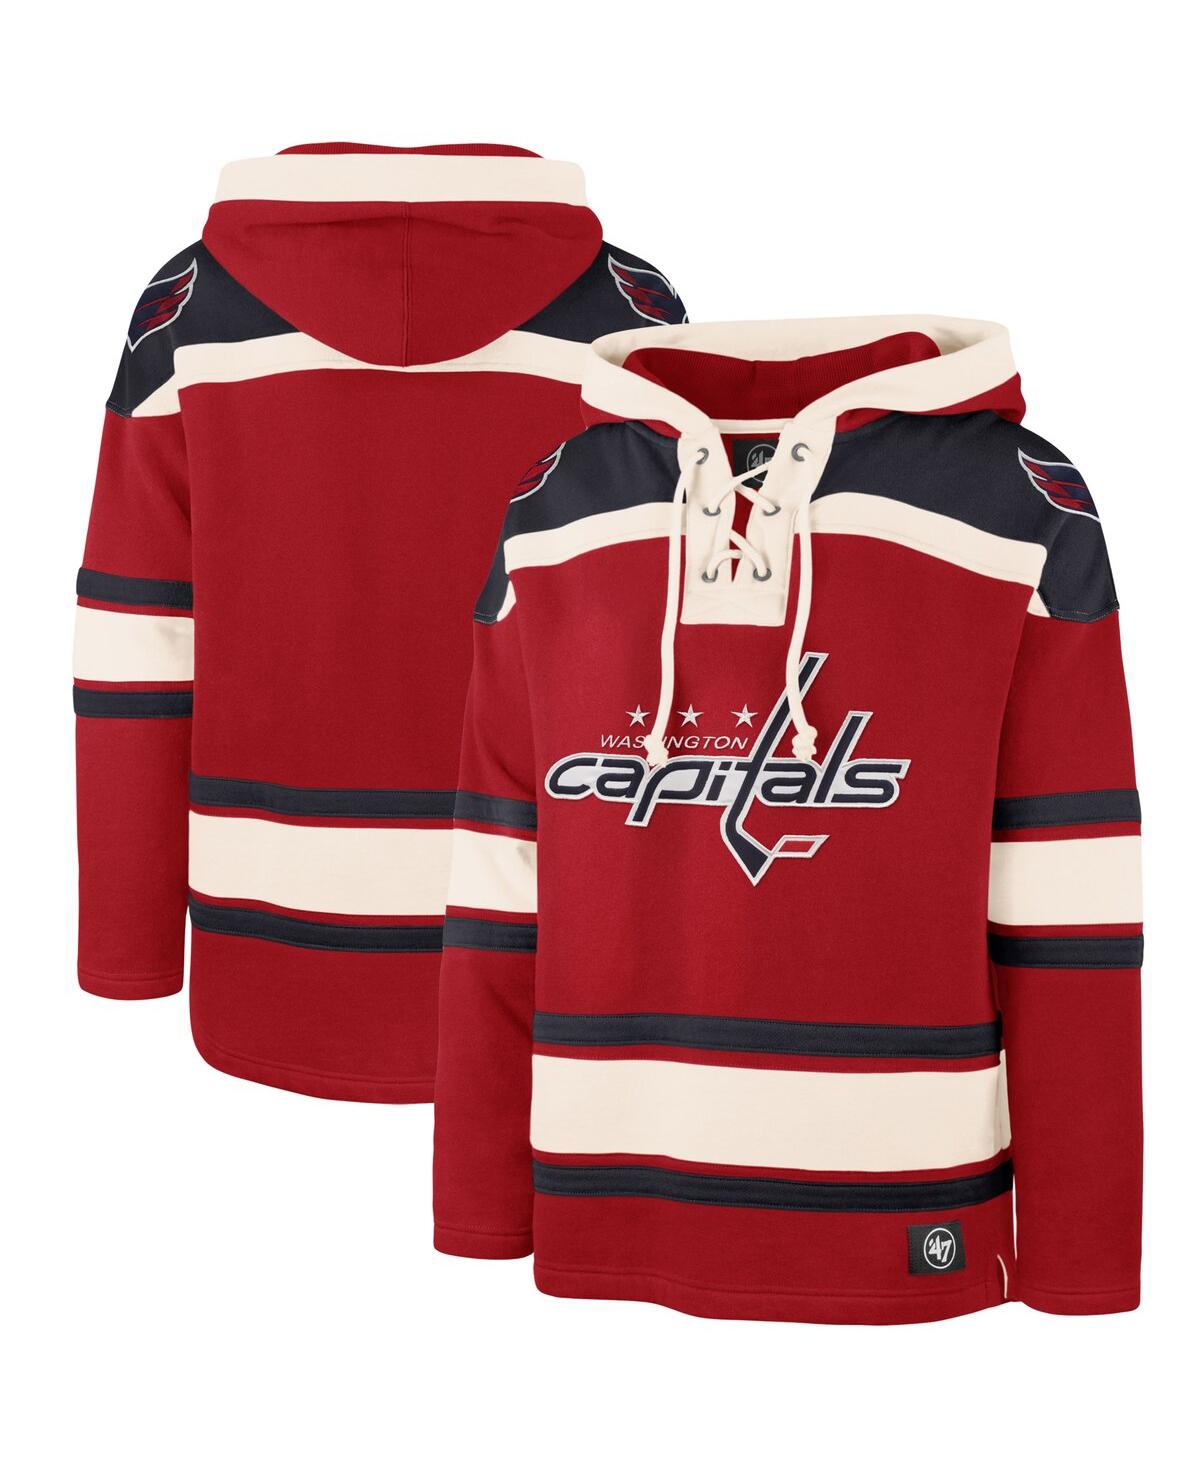 Men's Red Washington Capitals Superior Lacer Team Pullover Hoodie - Red